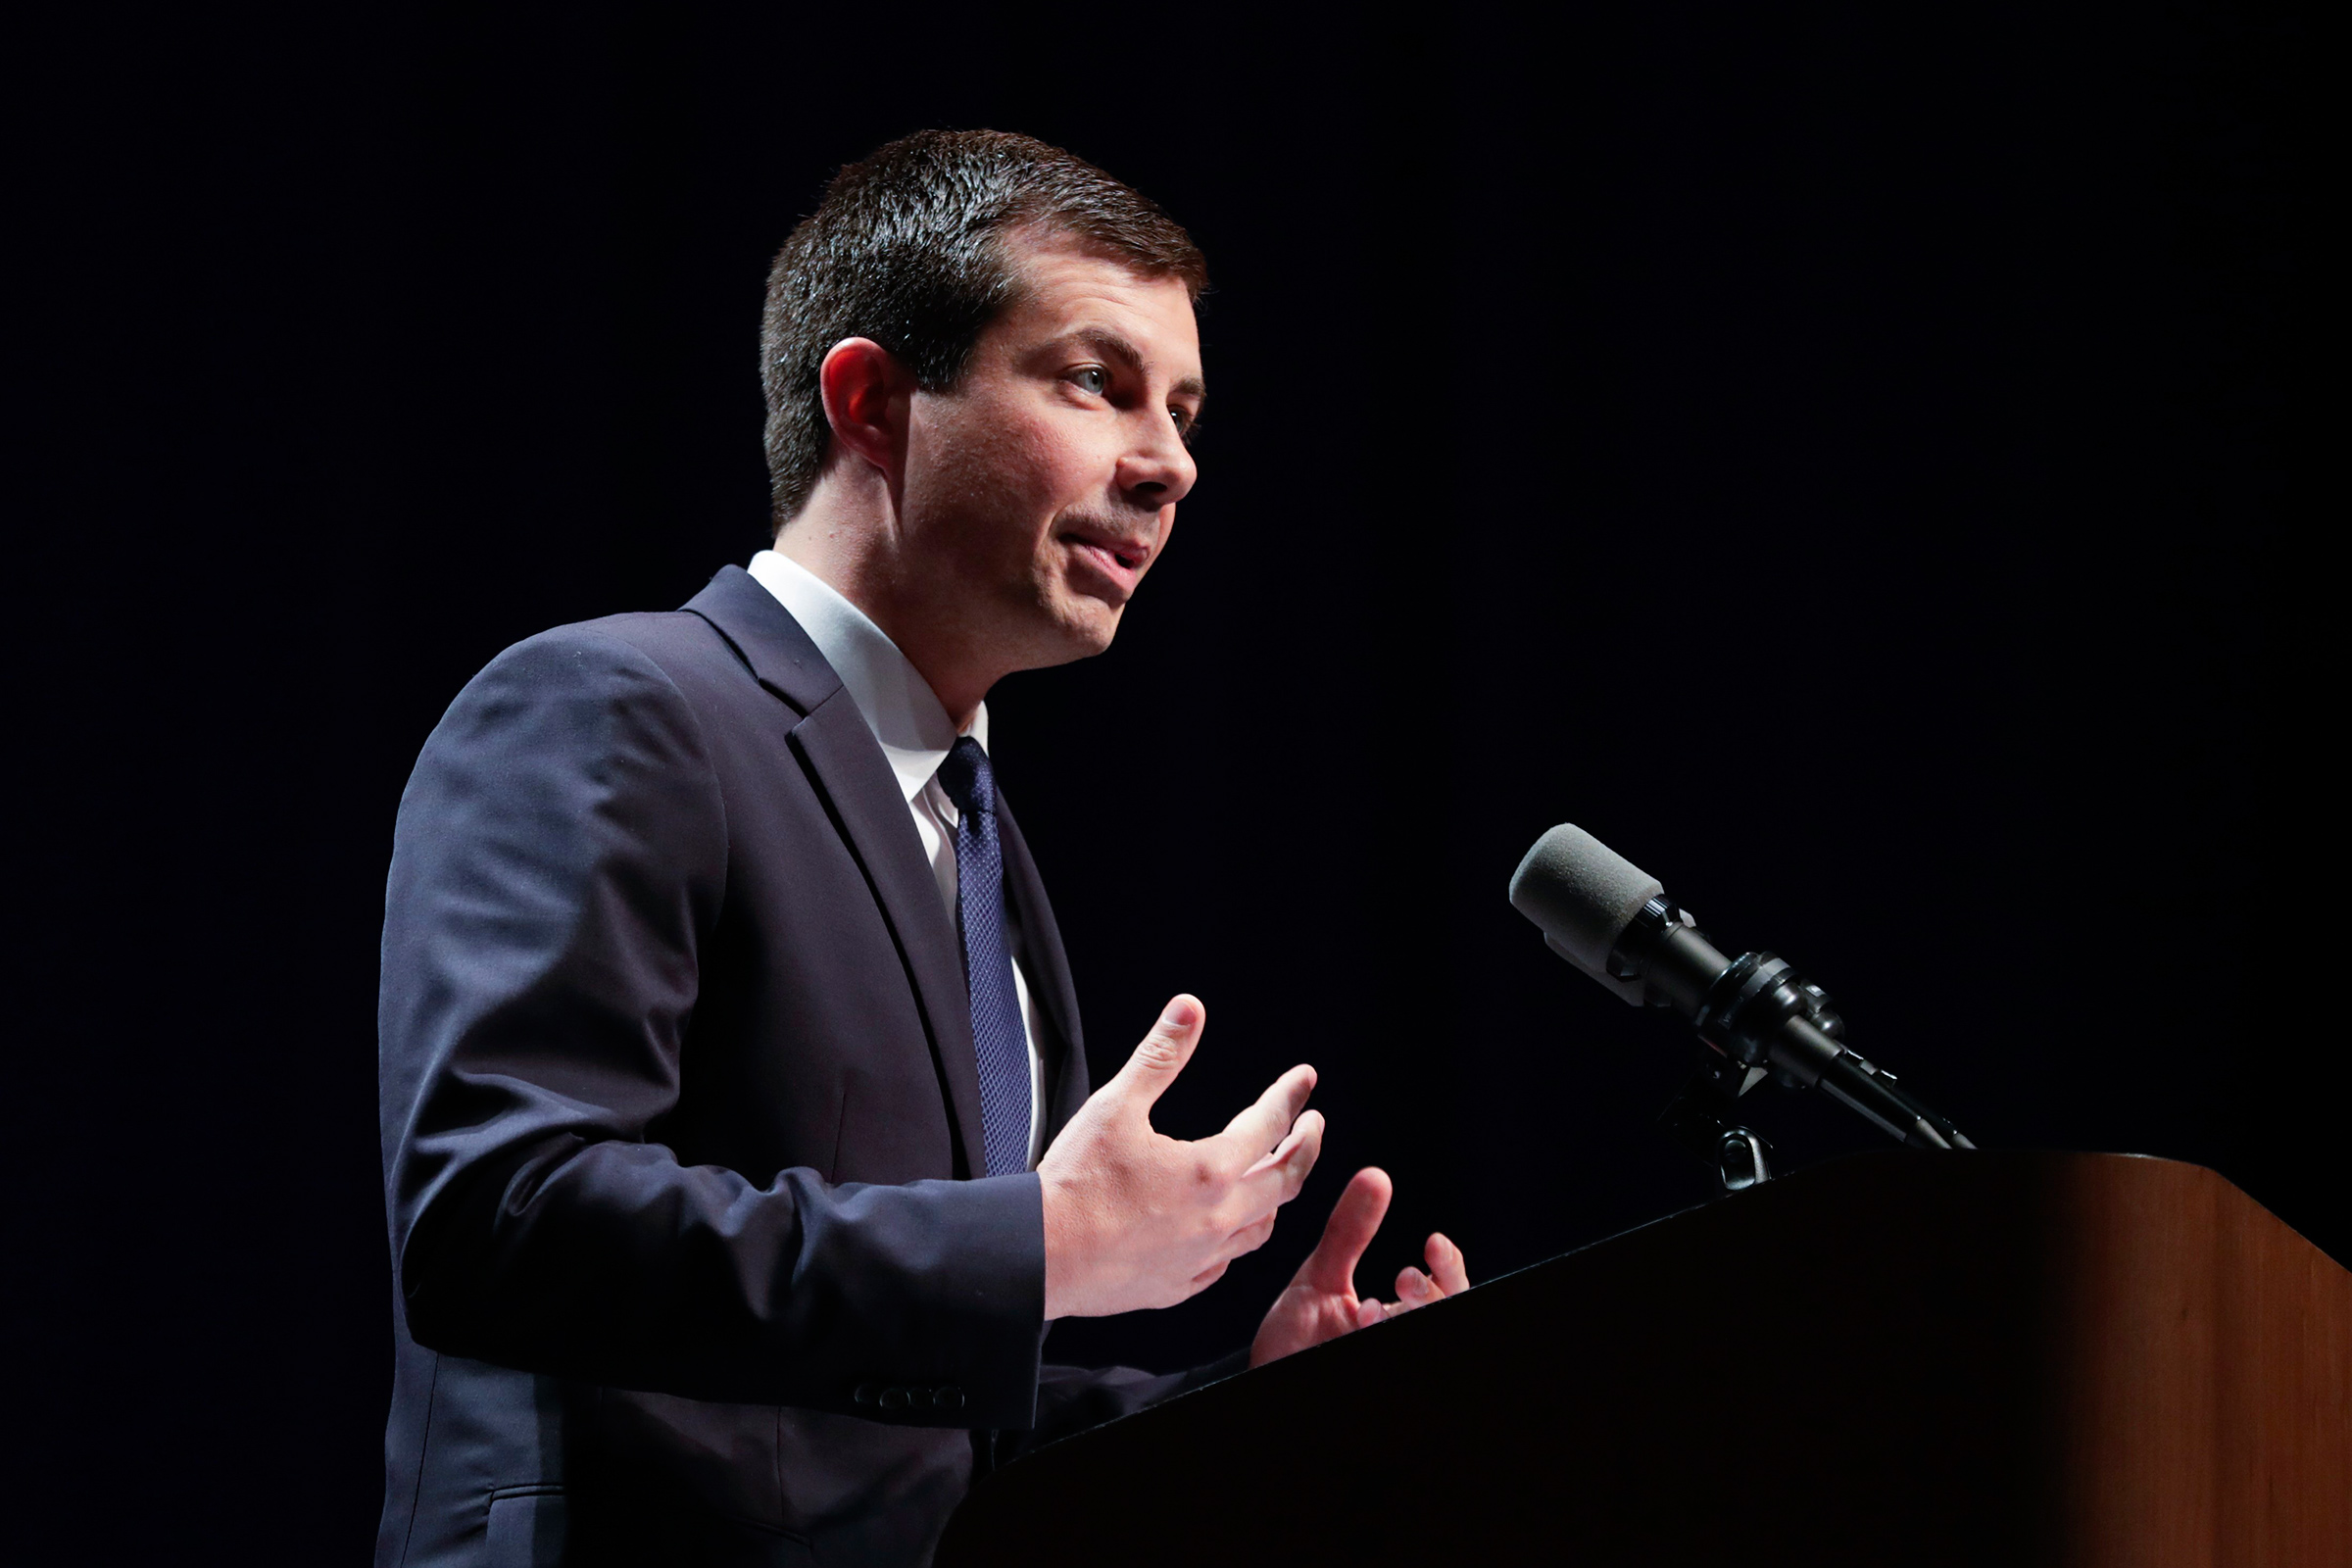 Democratic presidential candidate Mayor Pete Buttigieg delivers remarks on foreign policy and national security during a speech at the Indiana University Auditorium in Bloomington, Ind., June 11, 2019.